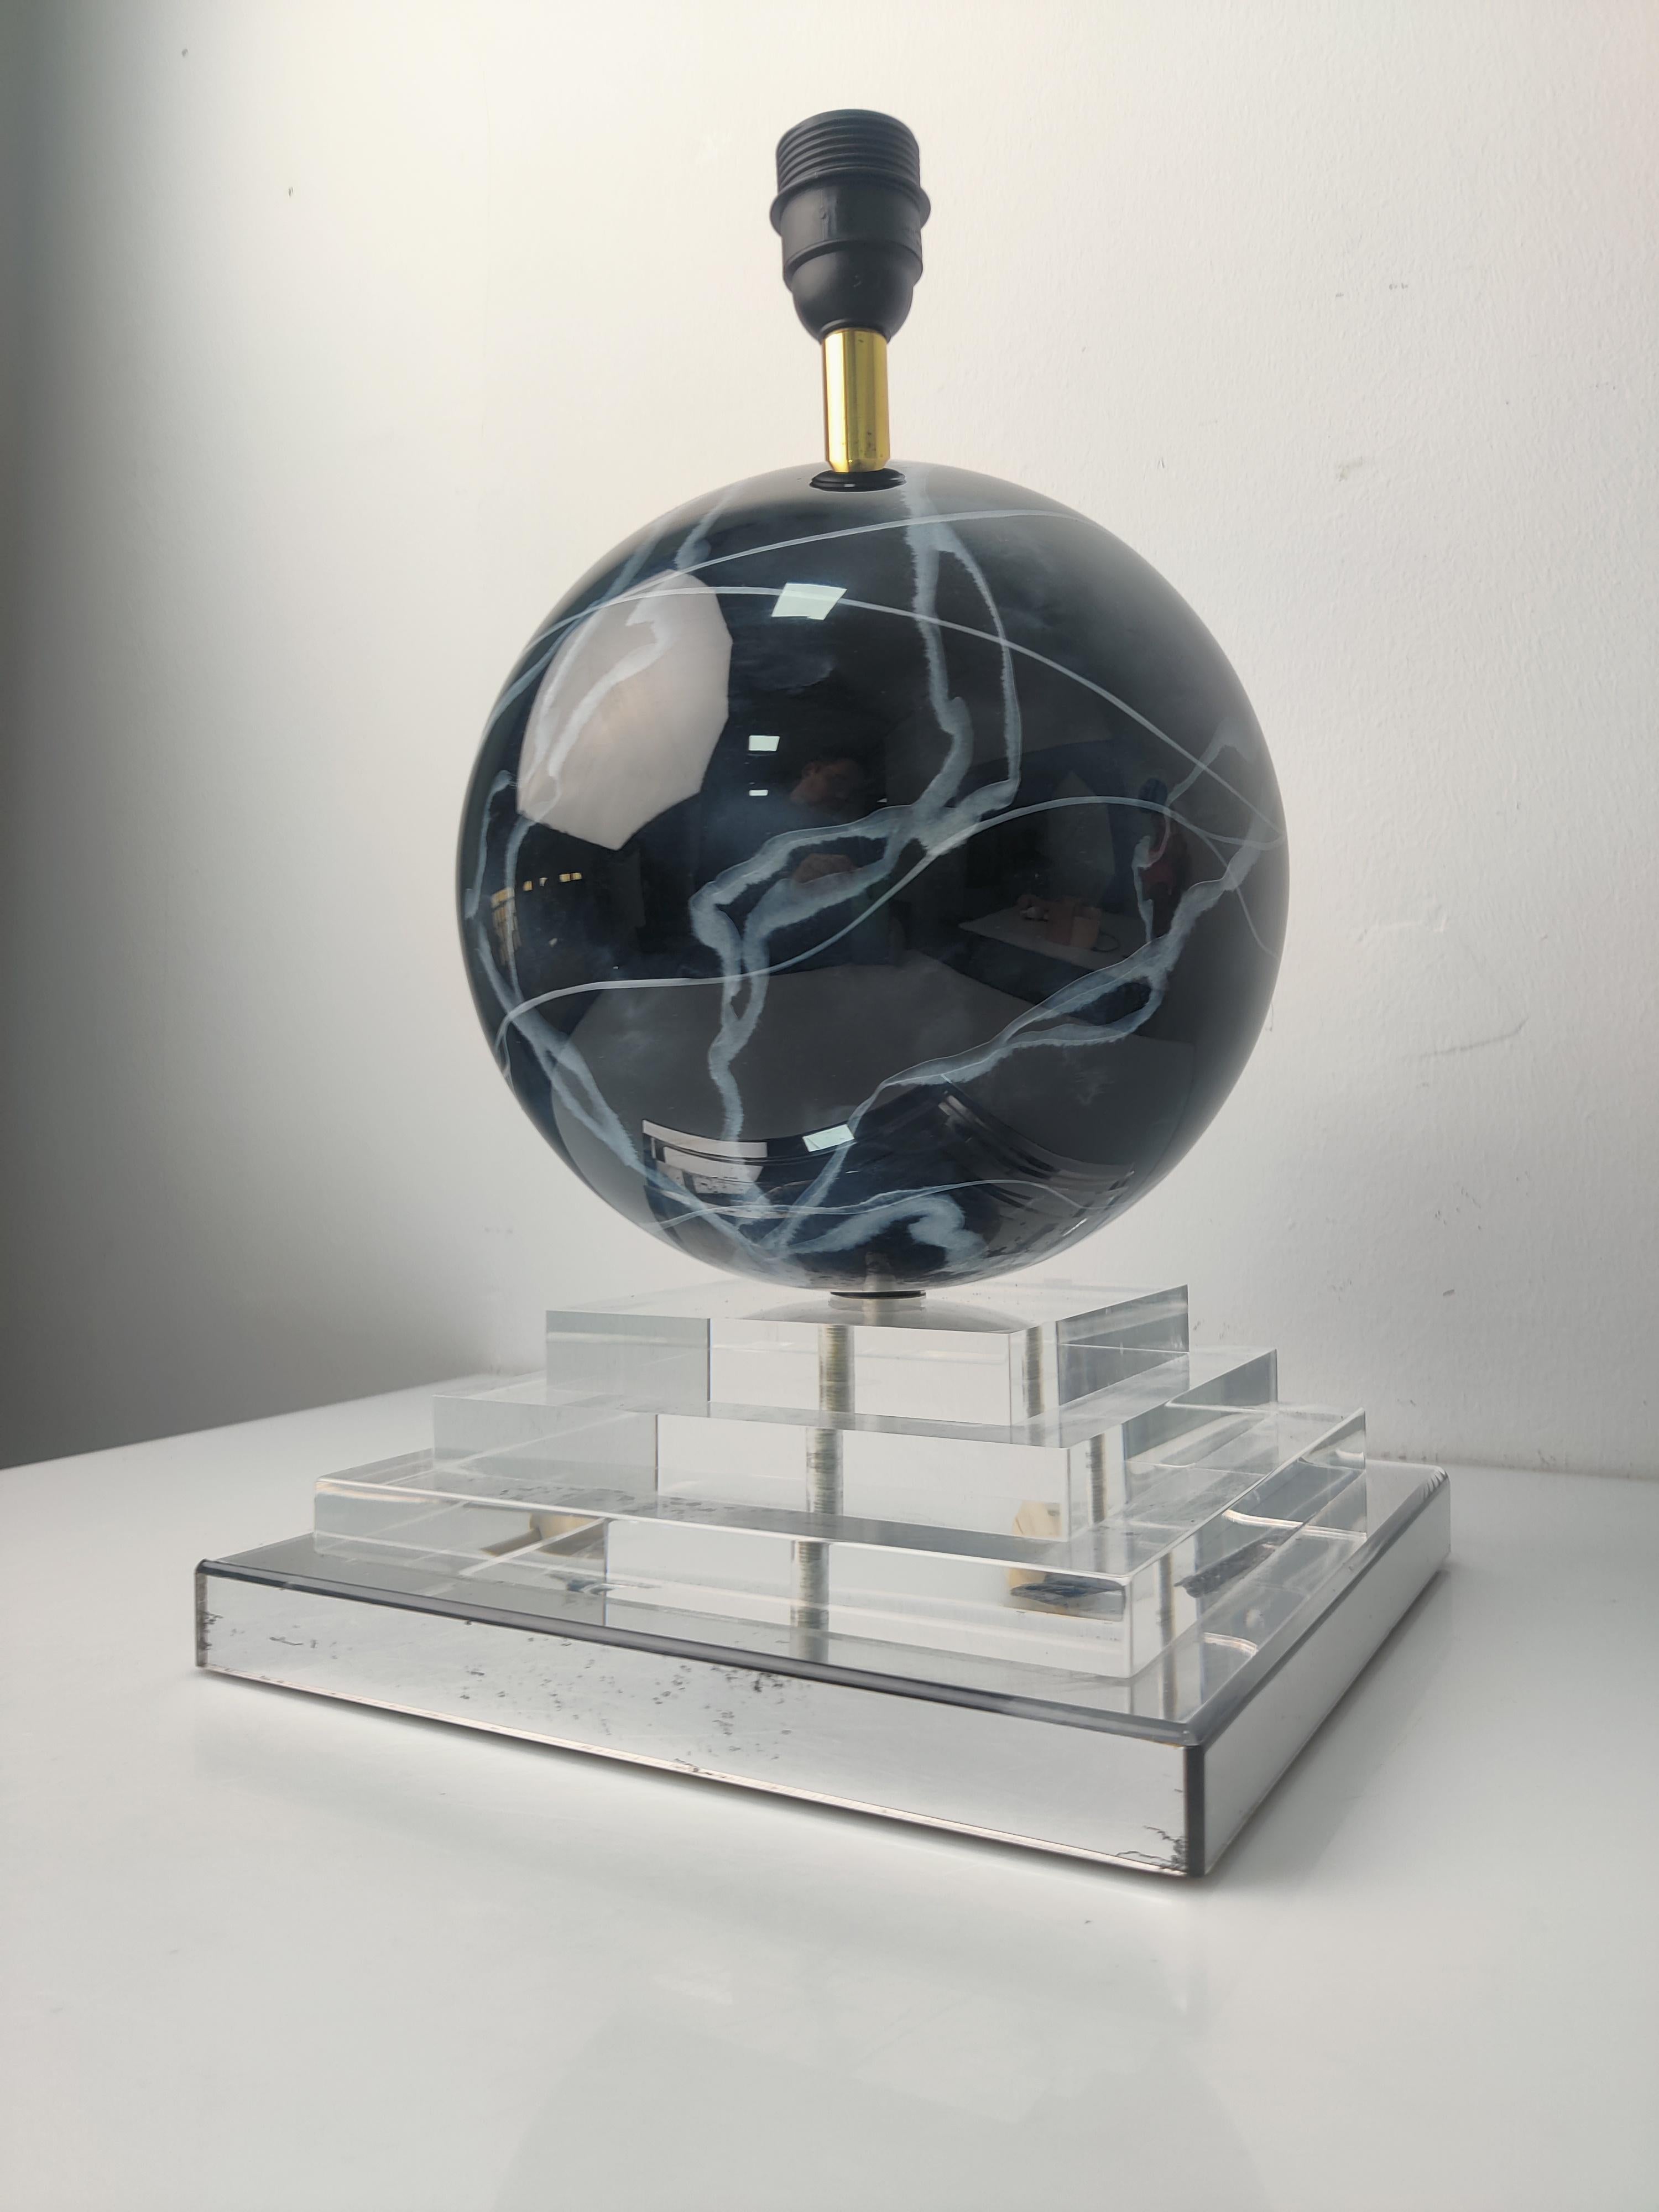 Spectacular vintage lamp with marble effect in the shape of a ball from the 60s. Super exclusive.